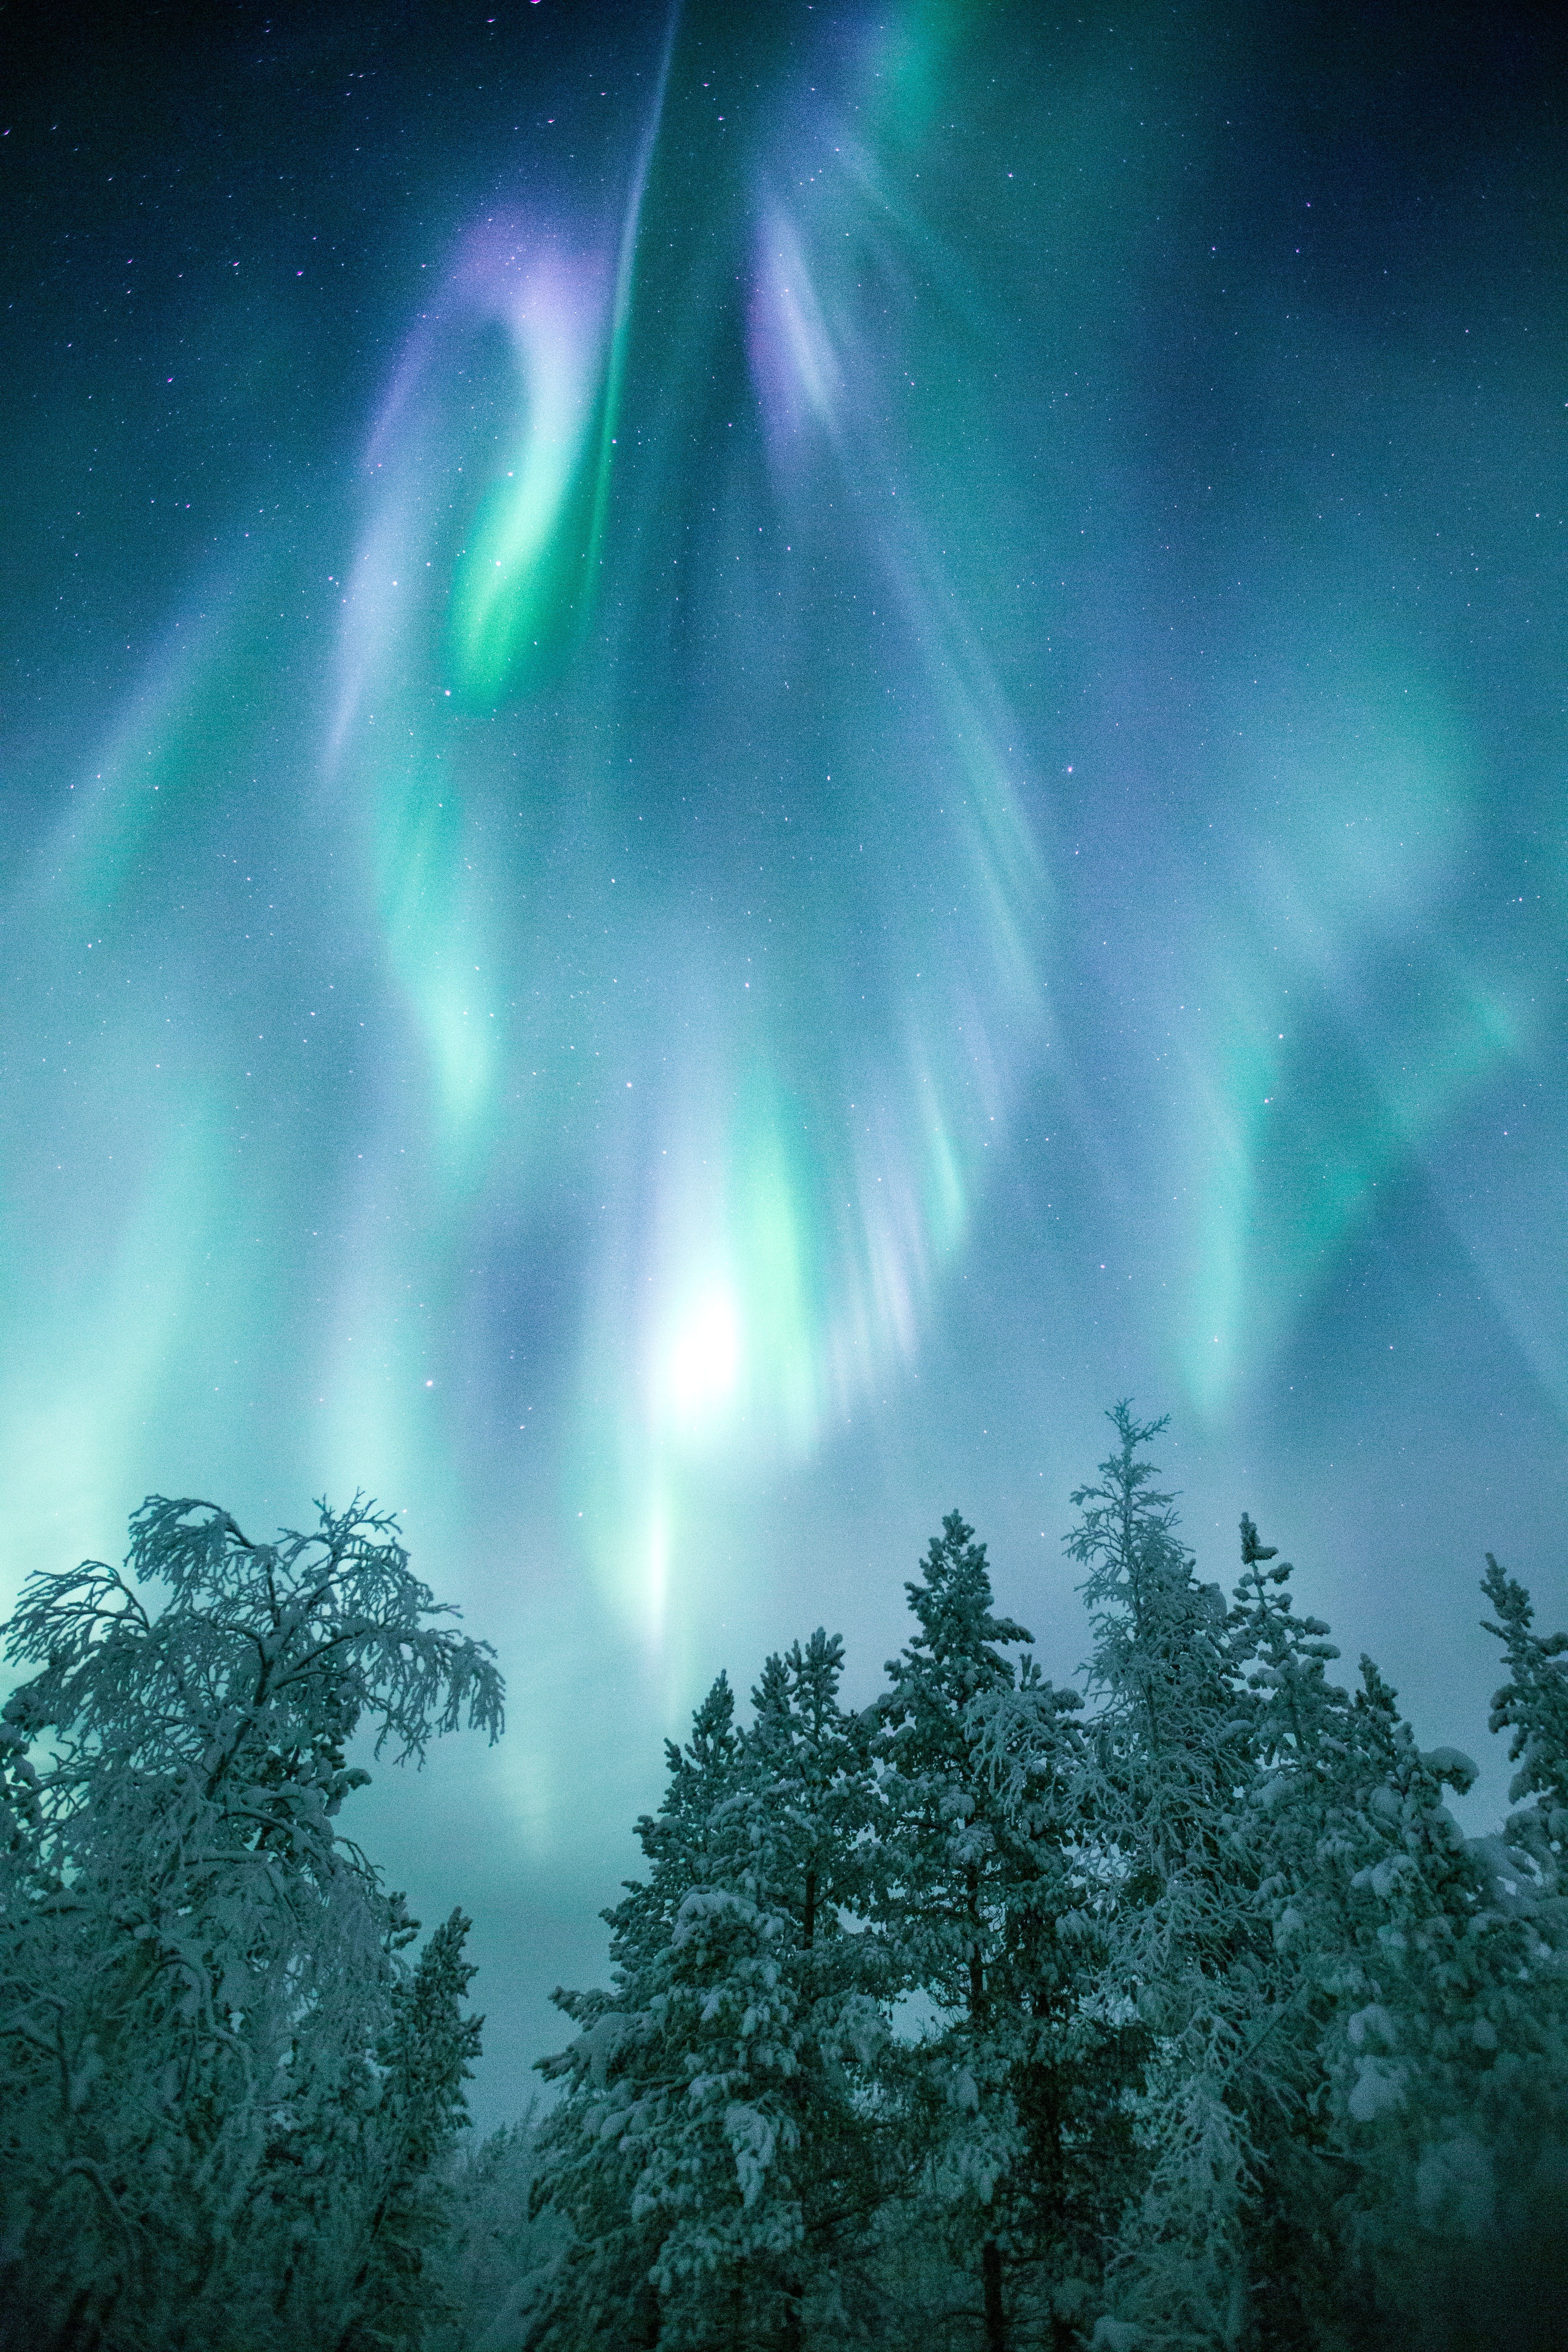 image of northern lights display above trees in Finland